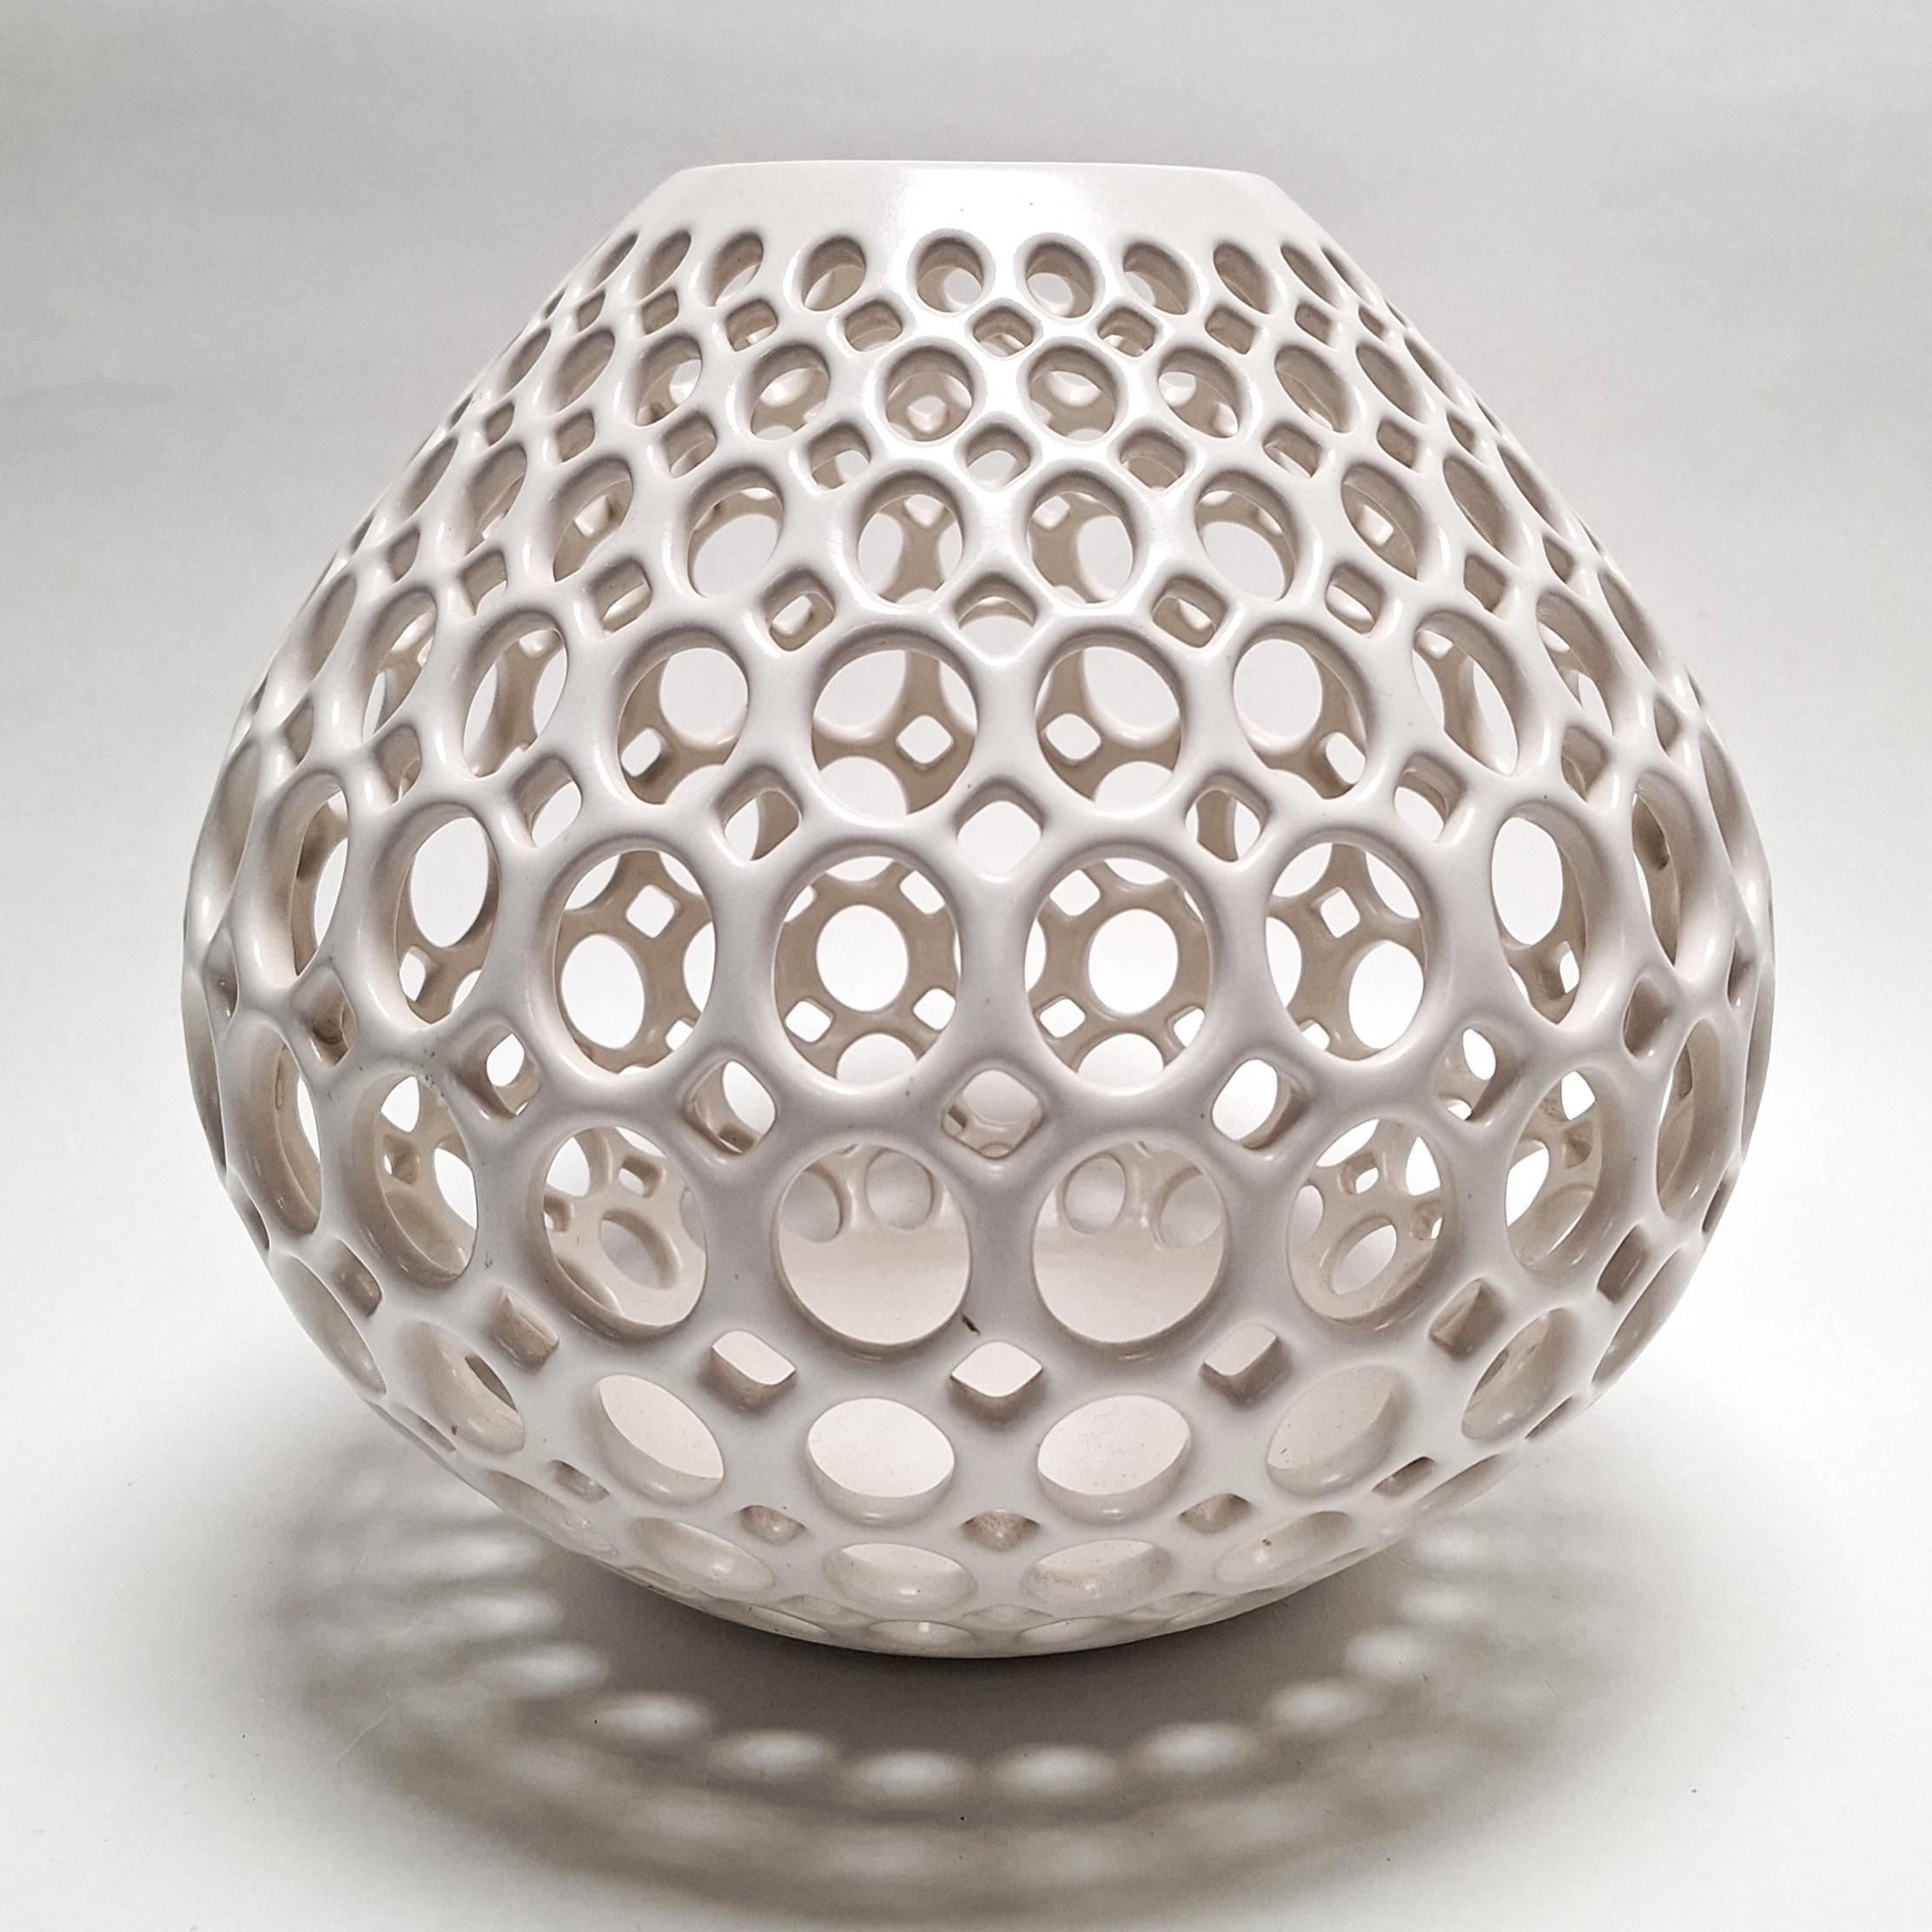 This Teardrop Oval Lace White Vessel is a unique medium size contemporary modern ceramic object by Californian artist Lynne Meade. It is wheel thrown, hand pierced and has a smooth white satin glaze. Everything is done by eye, without molds or